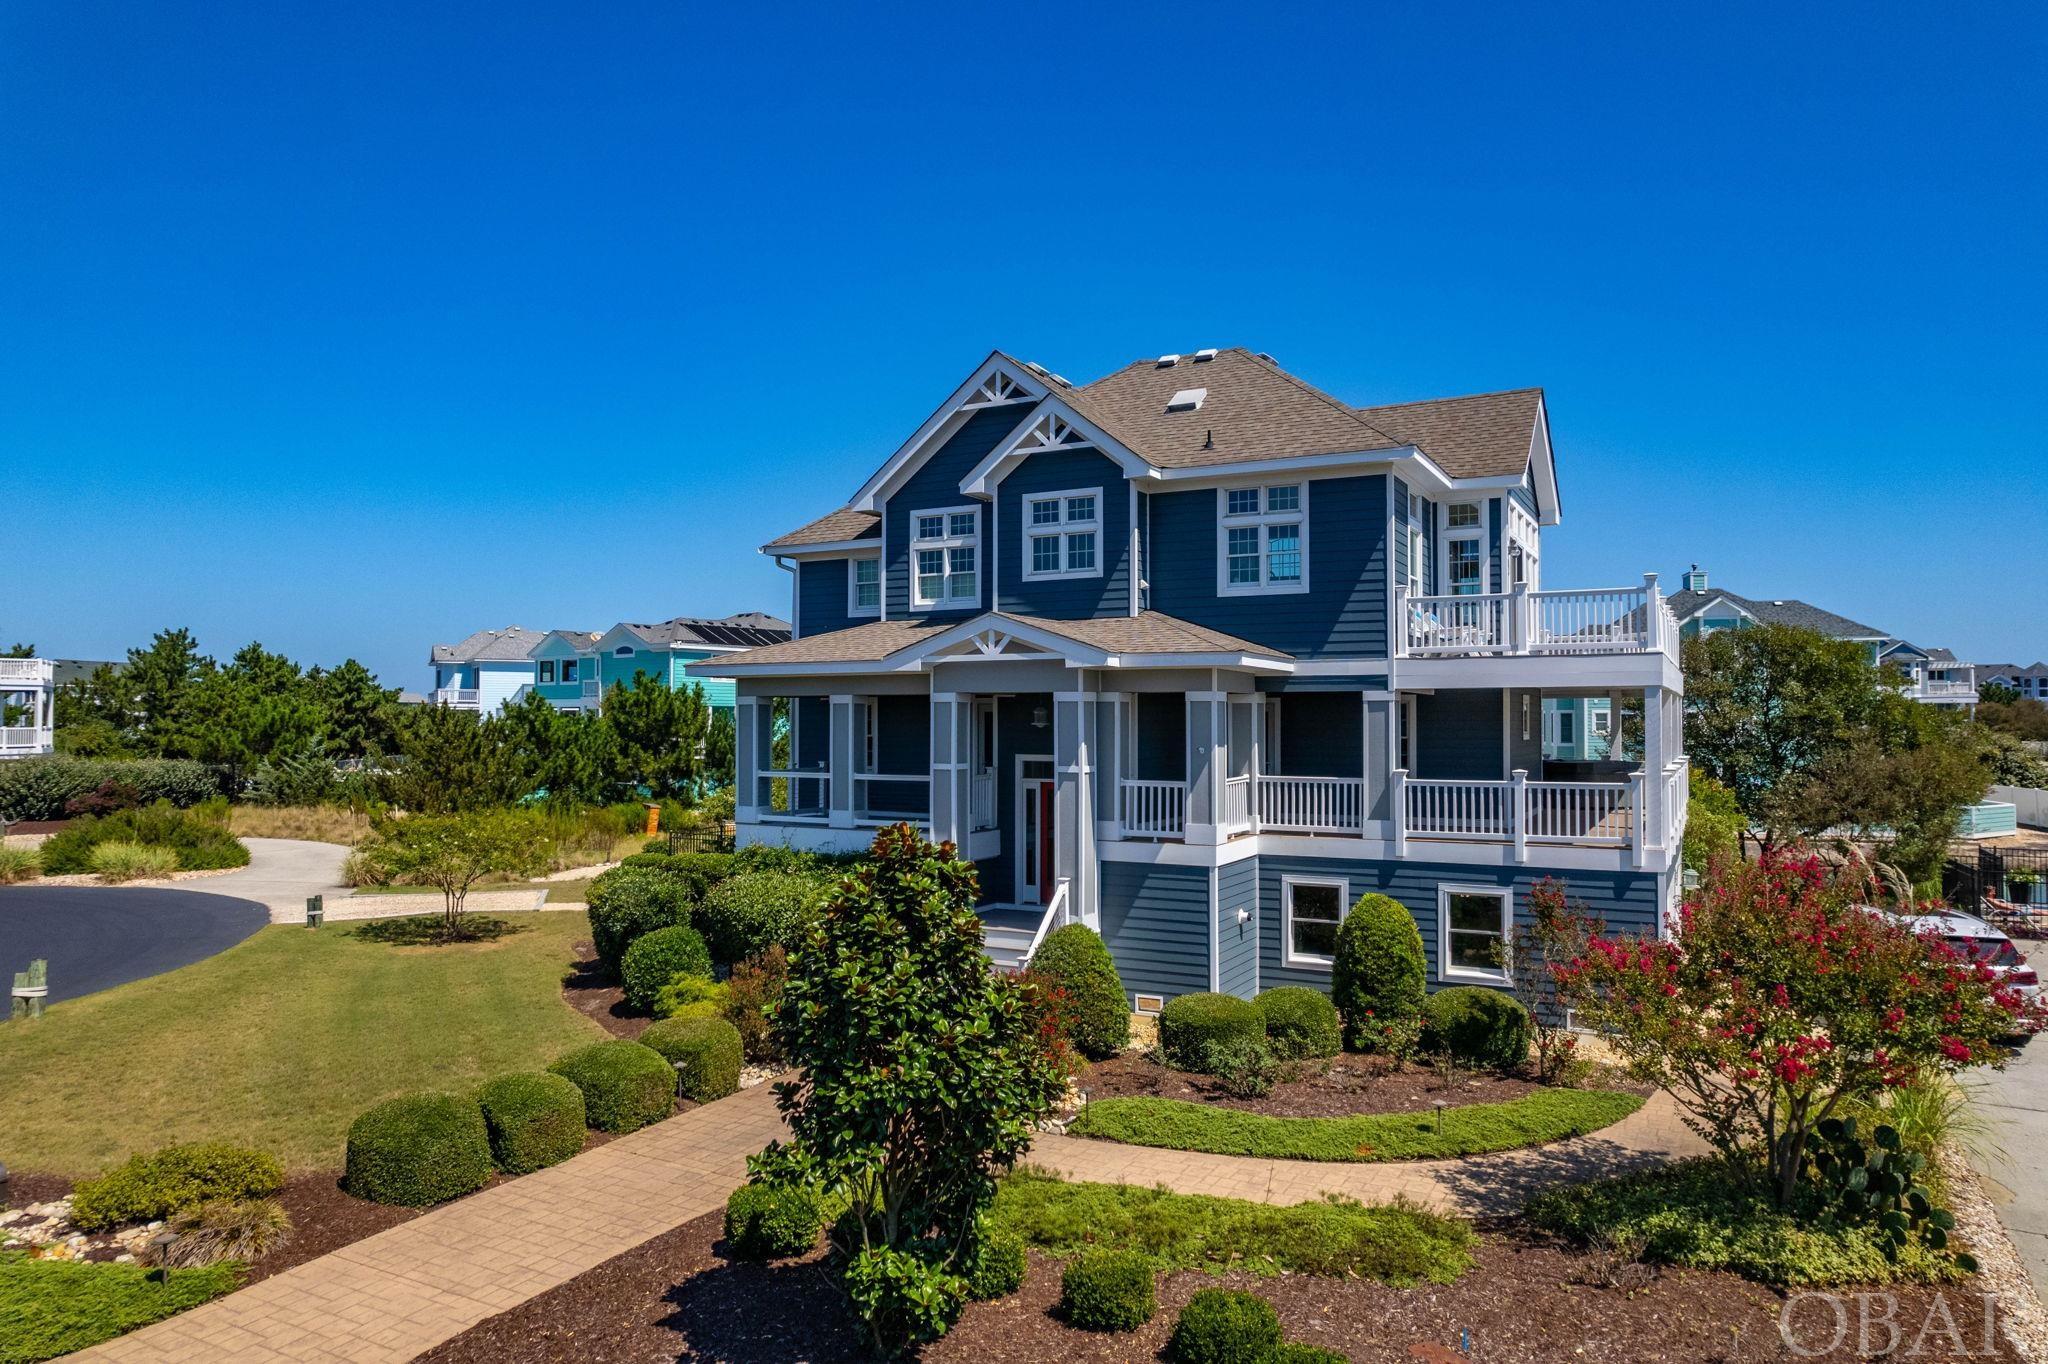 Located on a cul-de-sac, this remarkable 4-bedroom, 4-bathroom Buck Island property invites you to experience the pinnacle of coastal luxury. Situated in an 'X' flood zone, this home showcases high end finishes and a wealth of amenities for those in search of the Outer Banks lifestyle. The beautifully landscaped lot sets the stage for the grandeur that awaits within. Meticulous care has been taken to create a lush, welcoming environment that enhances the overall aesthetic of this private second home. Inside, discover the top-level, where natural light streams in from a panorama of large, mullioned windows encompassing the family room and dining areas, creating an inviting atmosphere. A gas fireplace provides cozy ambiance, and the cathedral ceiling and warm natural hardwood floors present an open airy feel to this space. From here, access the top deck to savor subtle ocean views that offer a tantalizing glimpse of the Atlantic in addition to the pond and fountain below.The kitchen, a chef's dream, is equipped with top-tier stainless steel appliances- Viking gas stove, wall oven, microwave, refrigerator, as well as a Bosch dishwasher. This culinary oasis also features sleek black natural stone countertops complimented by white subway tile and a breakfast bar workspace complete with power outlets.  Custom cabinetry, a high ceiling, and natural light from the mullioned windows add to this culinary haven. The top floor also boasts the spacious main en suite bedroom with private balcony. The large en suite bathroom enjoys natural light and features a double vanity, jet tub, and custom tiled glass front shower. This retreat is designed for ultimate relaxation and privacy. (A powder room between the upper and middle floors offers convenience for all.) The middle floor boasts another elegant en suite bedroom, 2 additional guestrooms, and a shared full hall bathroom, providing flexibility for families or guests, ensuring comfort and privacy. The practicality of daily life is made effortless with a dedicated laundry area on this floor, and an outdoor hot tub located on the expansive mid deck provides a relaxing, shaded escape to be enjoyed year-round. The ground-level den, complete with a wet bar and full size refrigerator, serves as the ideal hub for cozy movie marathons and could accommodate a regulation size billiard table. A full bath with custom tiled shower on this level provides convenient access to both the den and private pool just steps away. Discover your own private outdoor retreat - a glistening pool with expansive custom decking, an alfresco kitchen with granite counter space and a built-in gas grill, and a captivating fire pit beckon, promising countless evenings of enjoyment and relaxation. This Buck Island gem not only offers convenience to local restaurants, shopping, and attractions, owners in this premiere oceanside community enjoy amenities such as dedicated ocean access, community pool, and tennis courts. This coastal sanctuary is more than just a second home, this property is an invitation to embrace the Outer Banks lifestyle.